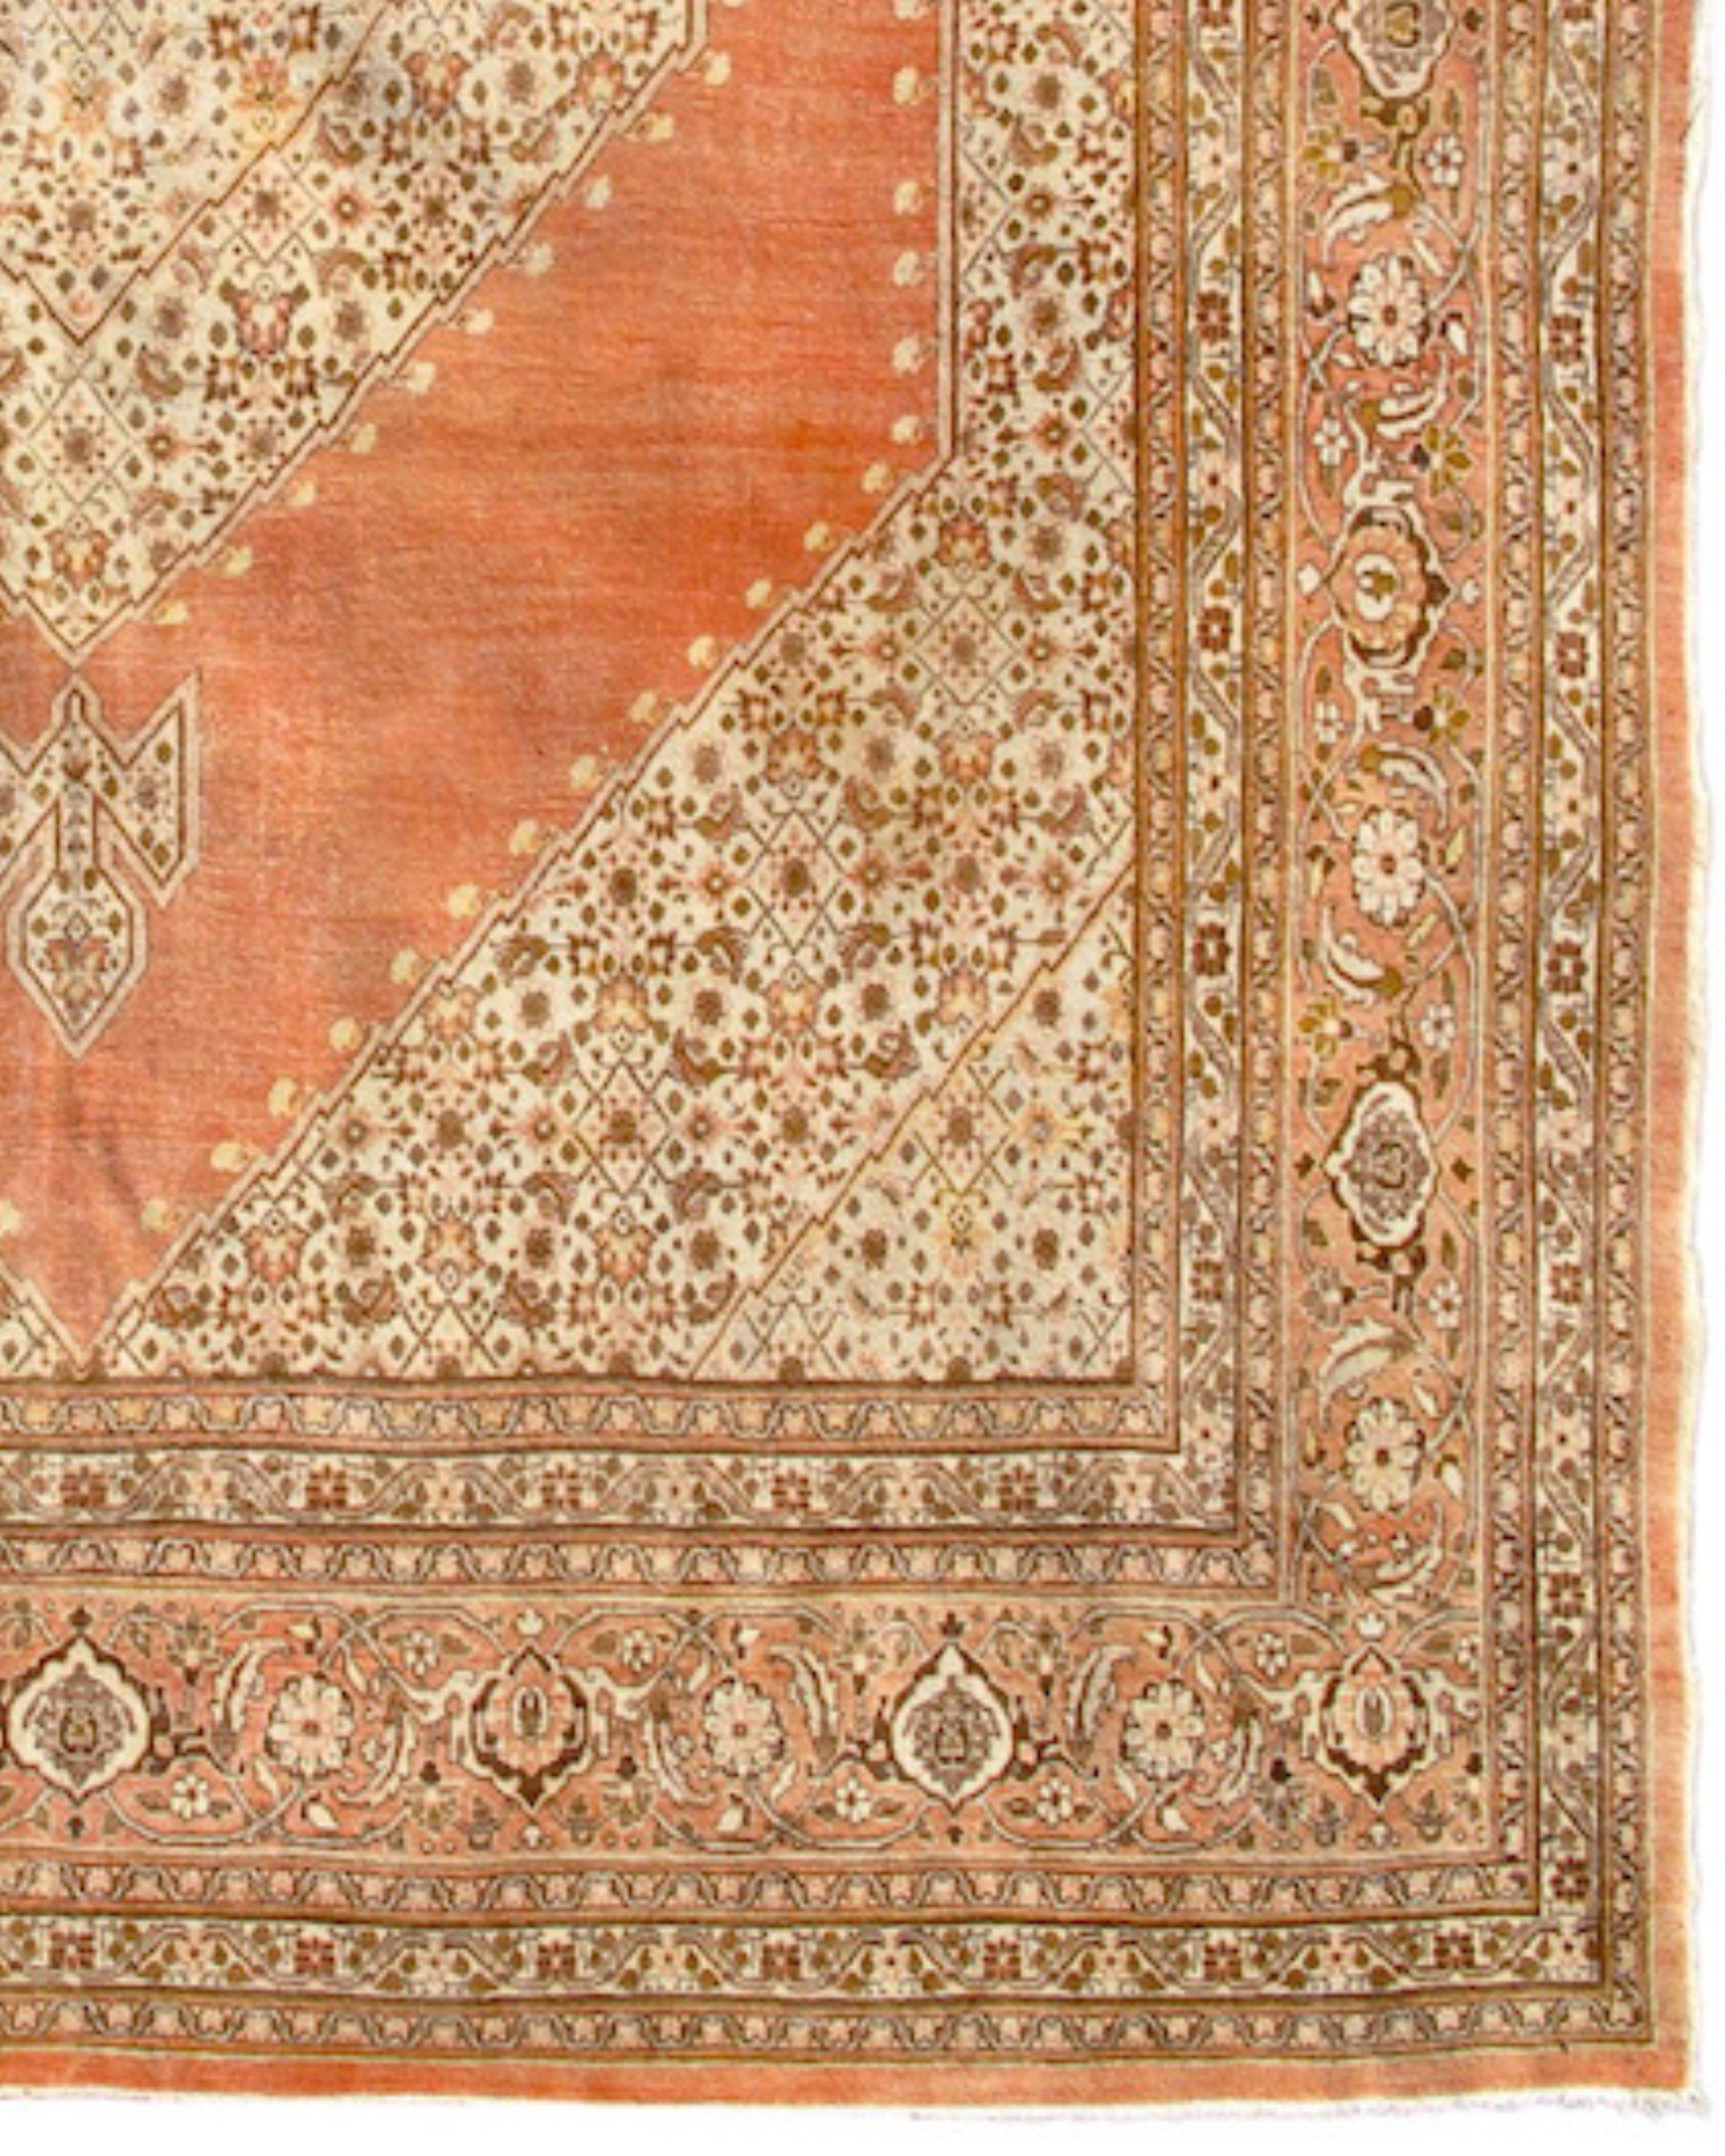 Antique Persian Tabriz Rug, c. 1900

This elegant Tabriz carpet balances open spaces with areas of finely detailed and precise drawing composed in a soft palette of mellow harmonious tones of creams and ochre. Qualities such as these made antique